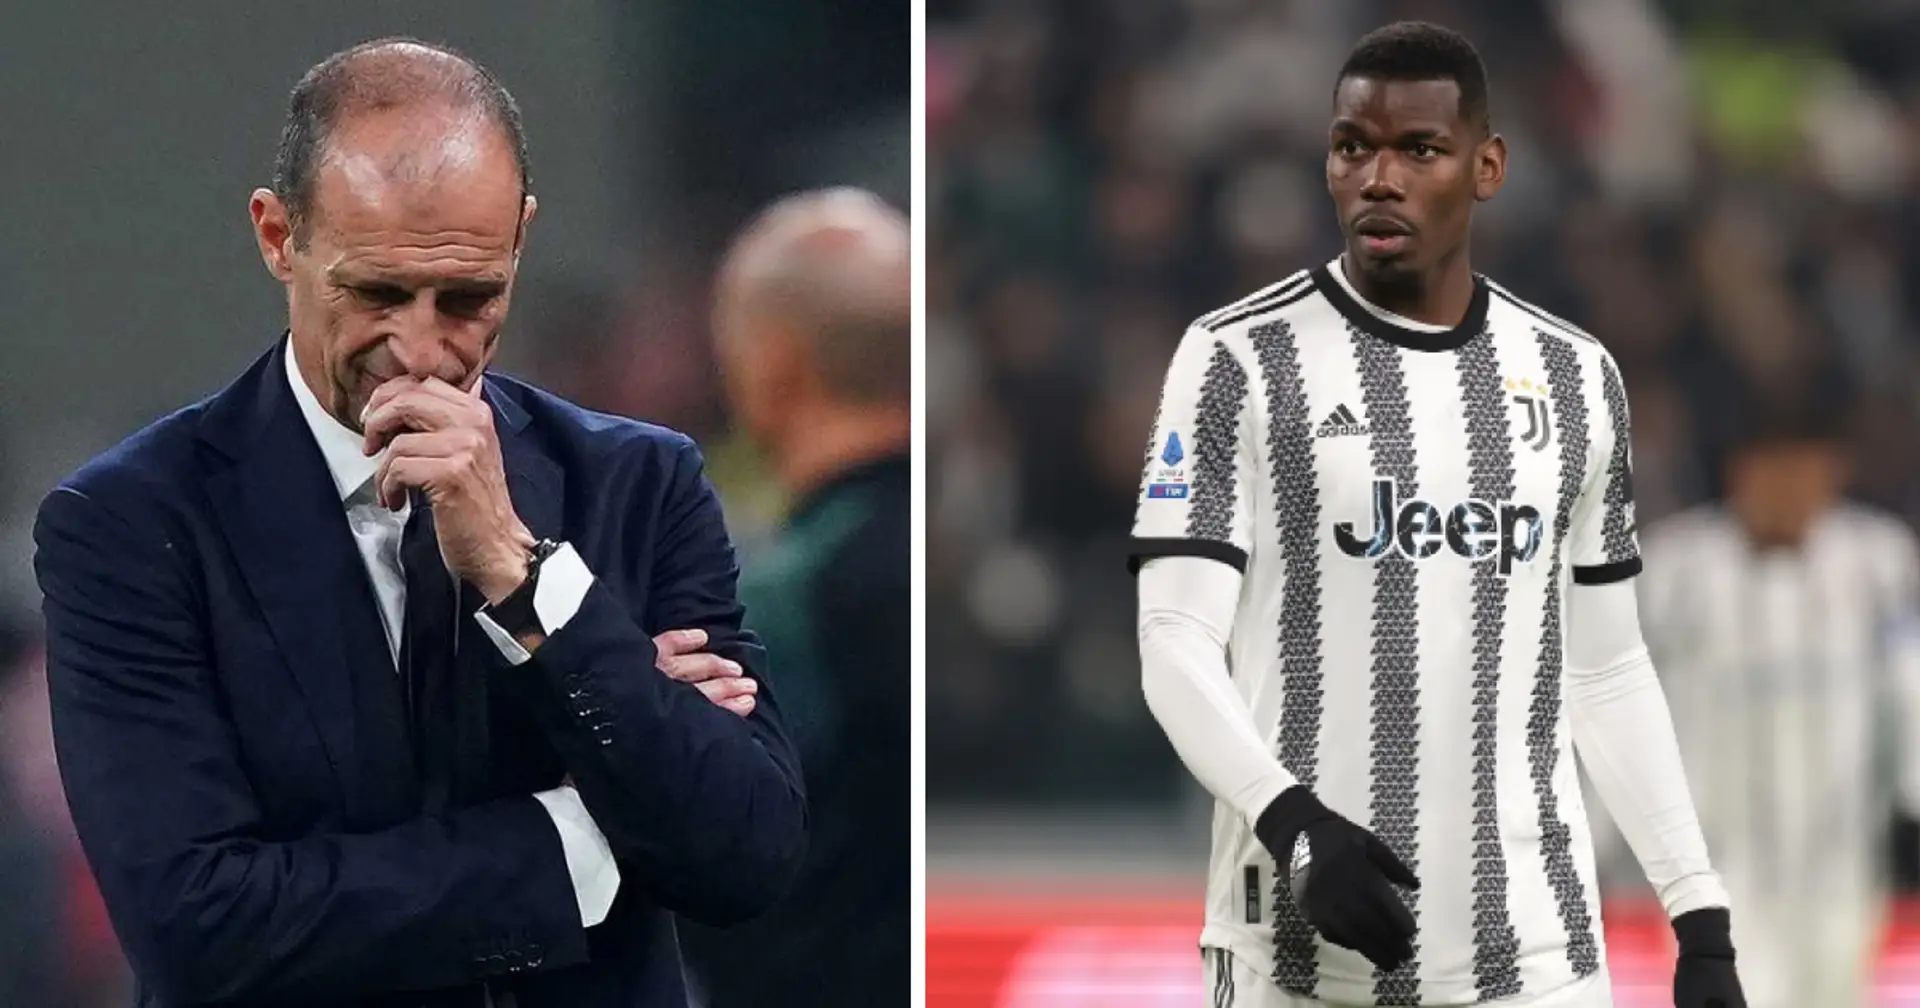 Juventus could save a significant amount of money if they offload Paul Pogba to Saudi Arabia